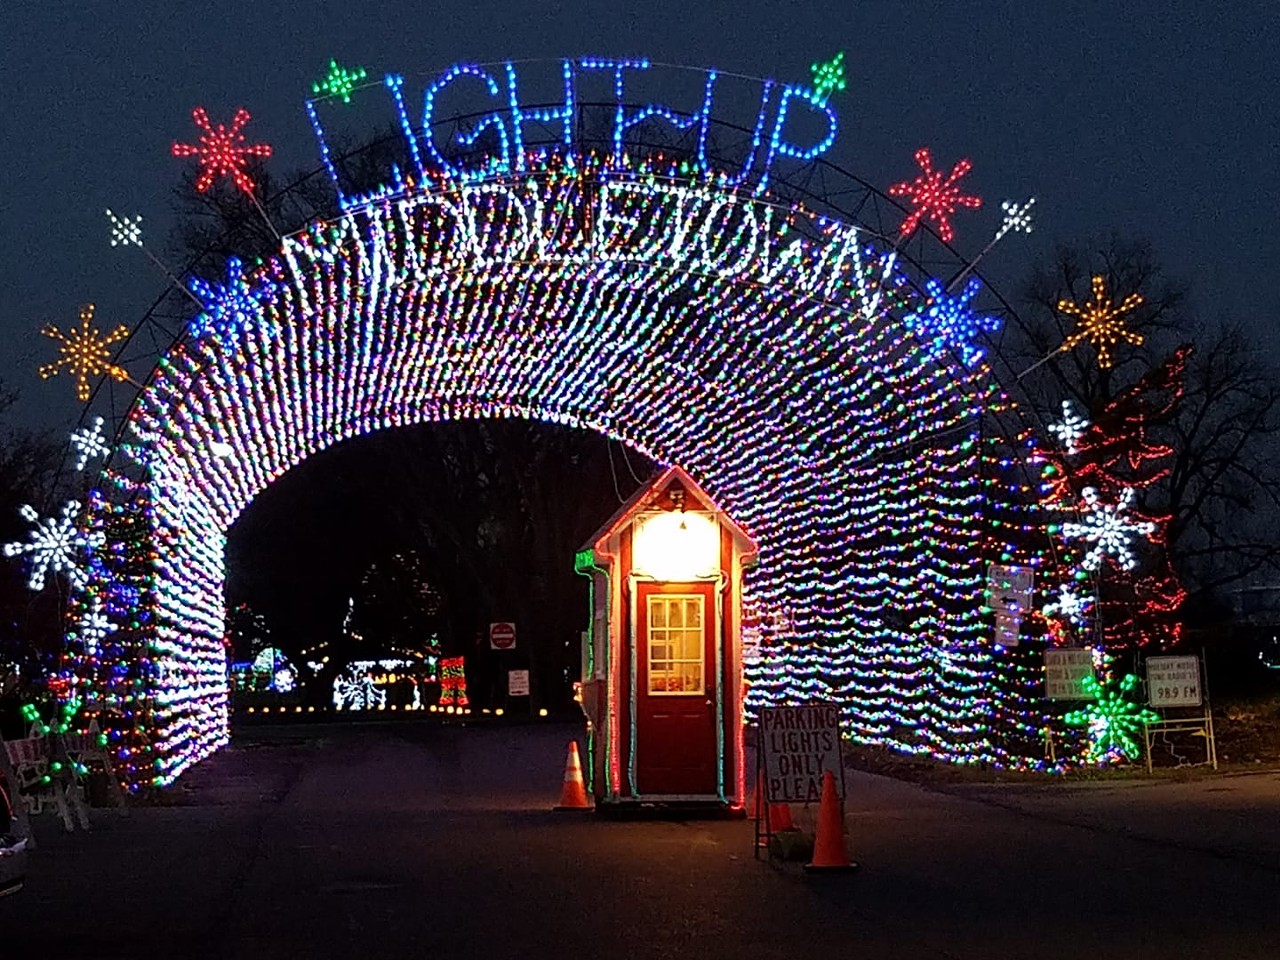 Light Up Middletown
500 Tytus Ave., Middletown
This "fantasy drive-thru light display in Middletown, Ohio's downtown 100 acre Smith Park" not only decks the halls with tons of glowing holiday displays, it also serves as a fundraiser for Middletown City Parks. Nov. 25-Dec. 31. Admission is by cash donation.
Photo: Facebook.com/Light-Up-Middletown